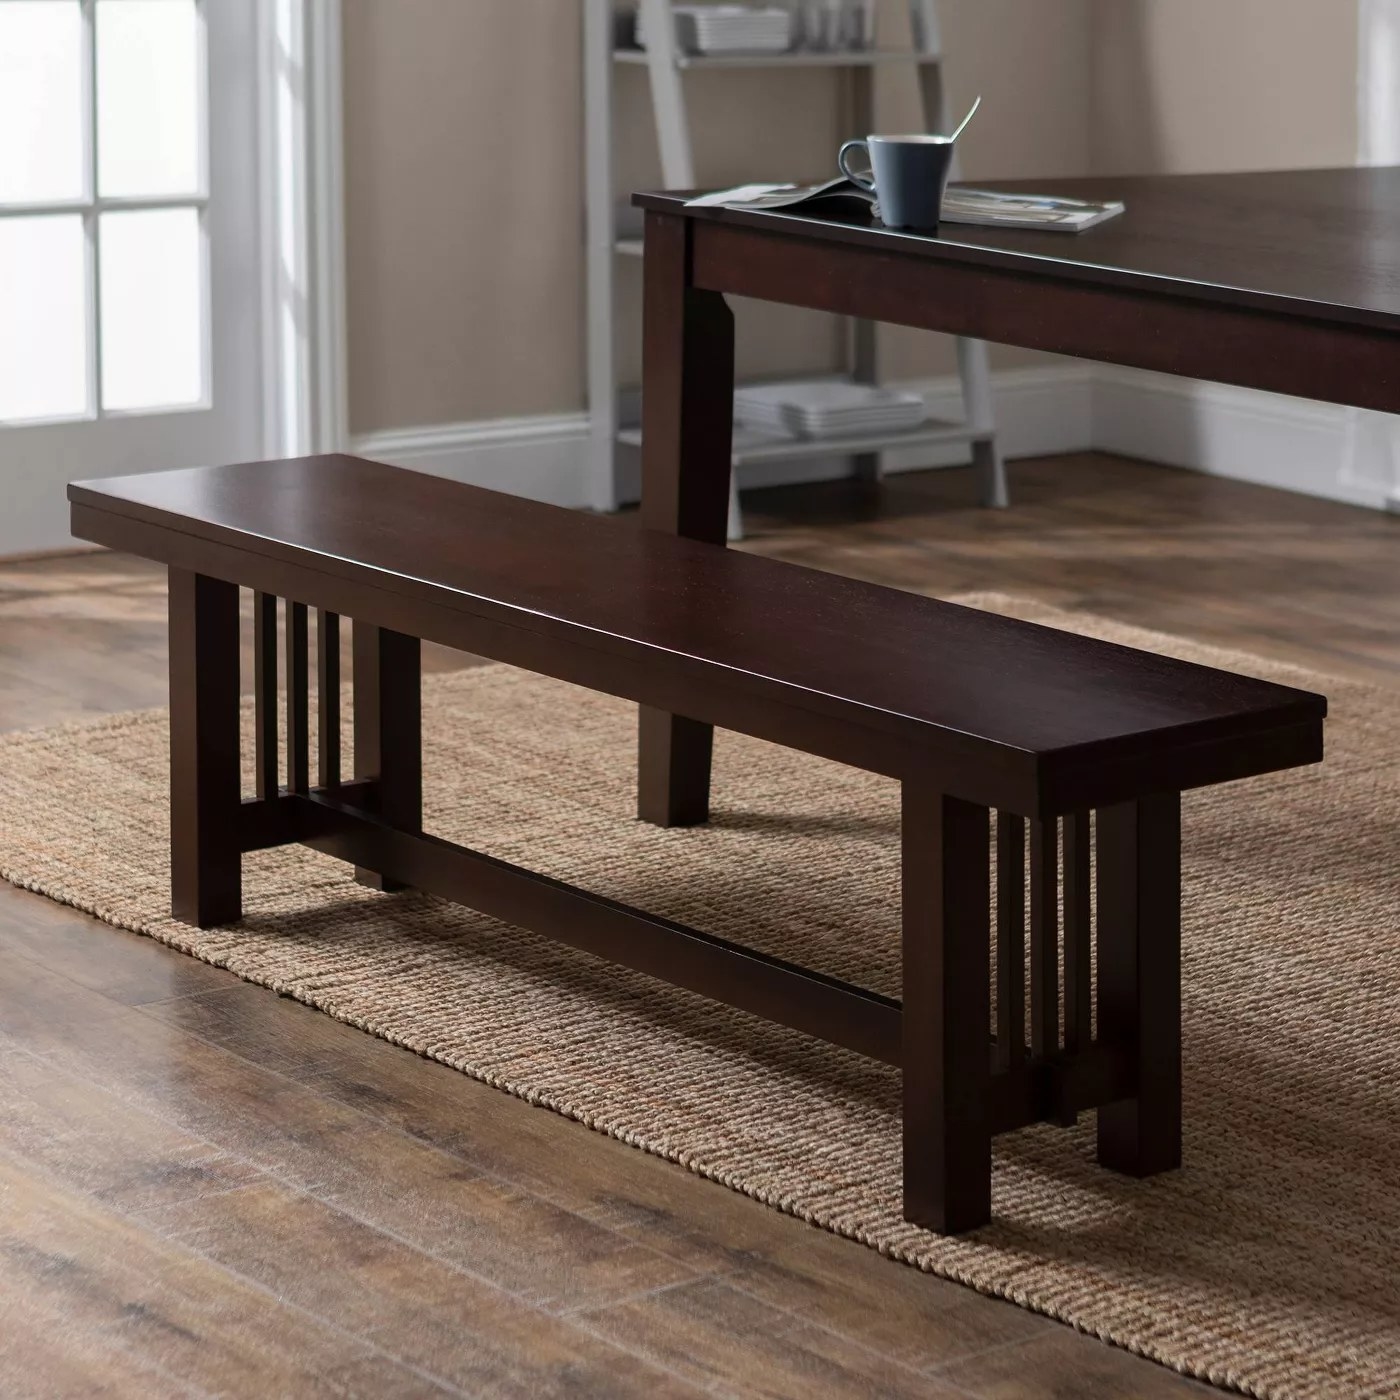 The cappuccino wood dining bench